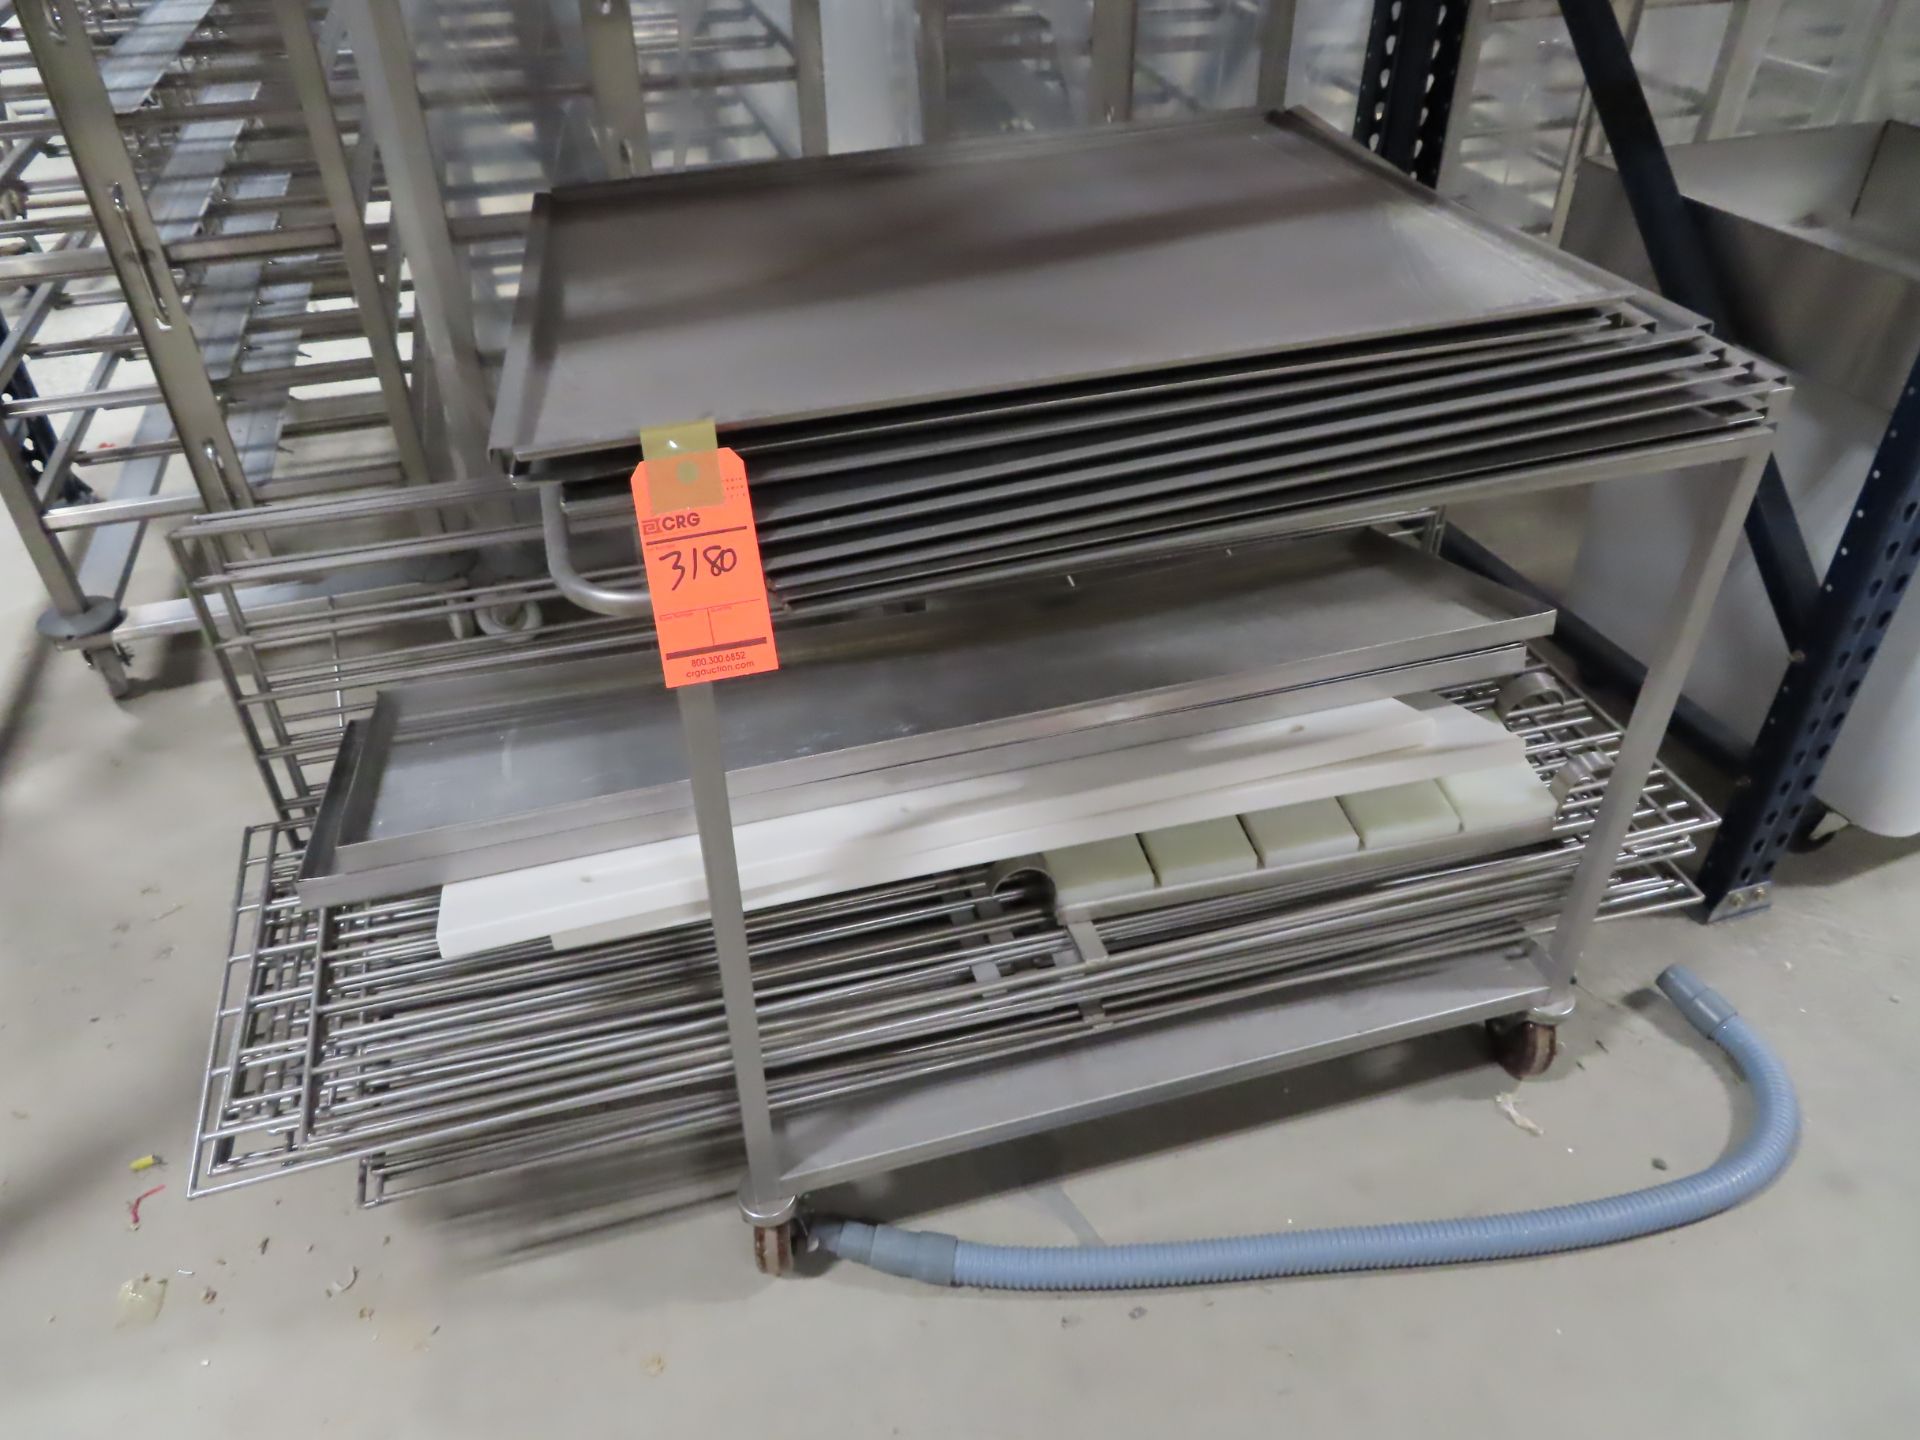 Lot of assorted stainless steel cage accessories, sipper sack holders, donnage shelving, etc. - Image 3 of 9